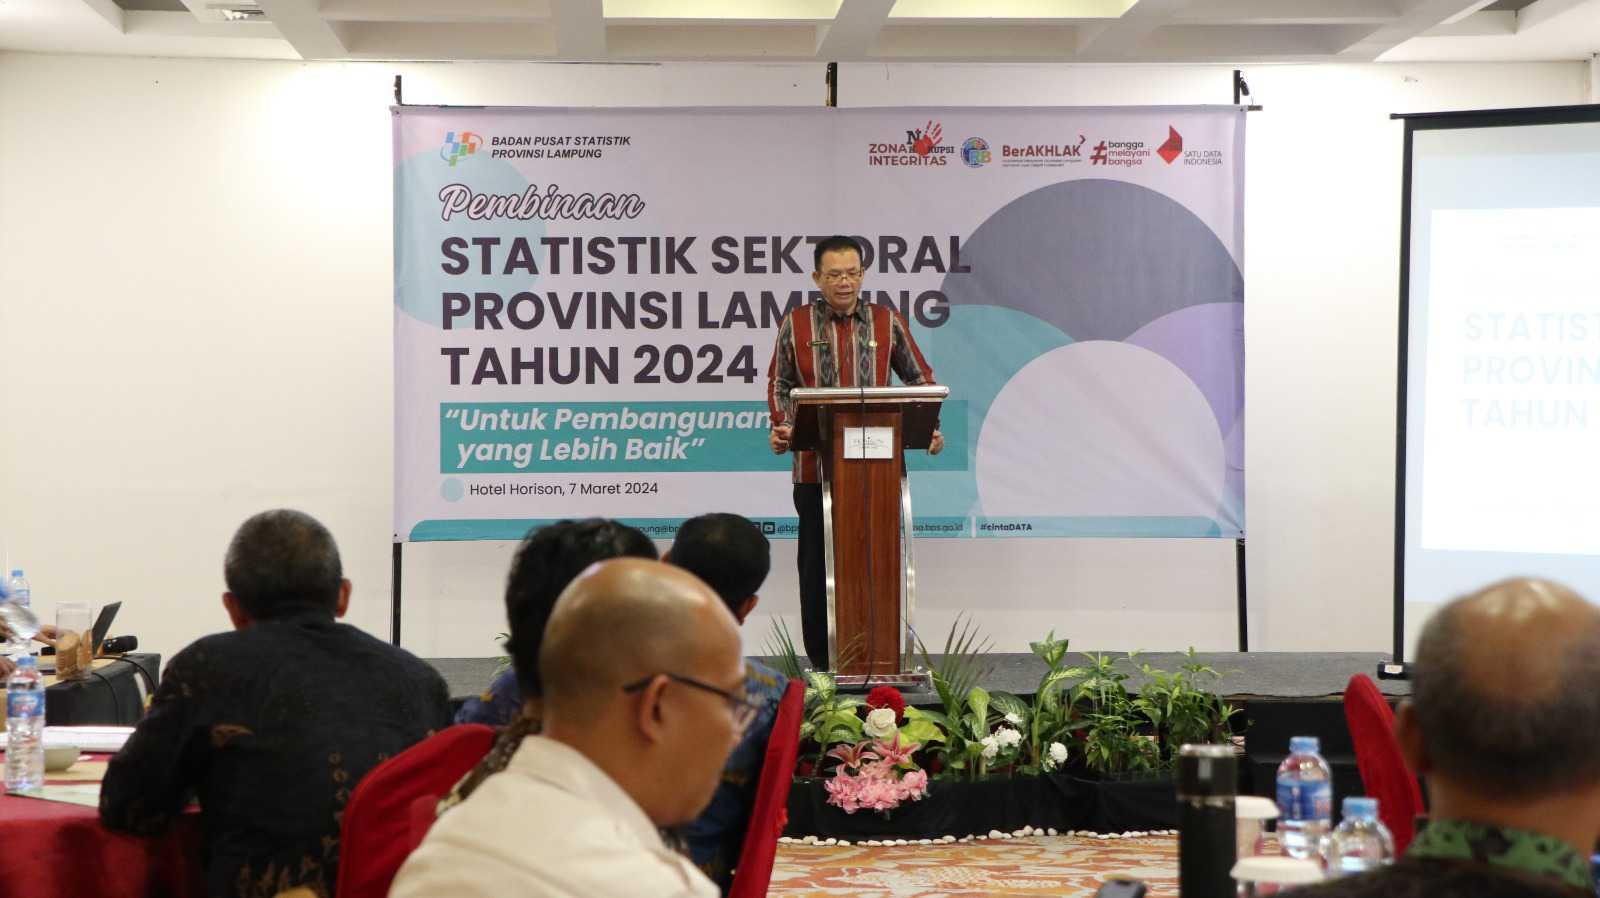 Synergy between BPS and Regional Apparatus: Realizing Quality Sectoral Statistics for Lampung